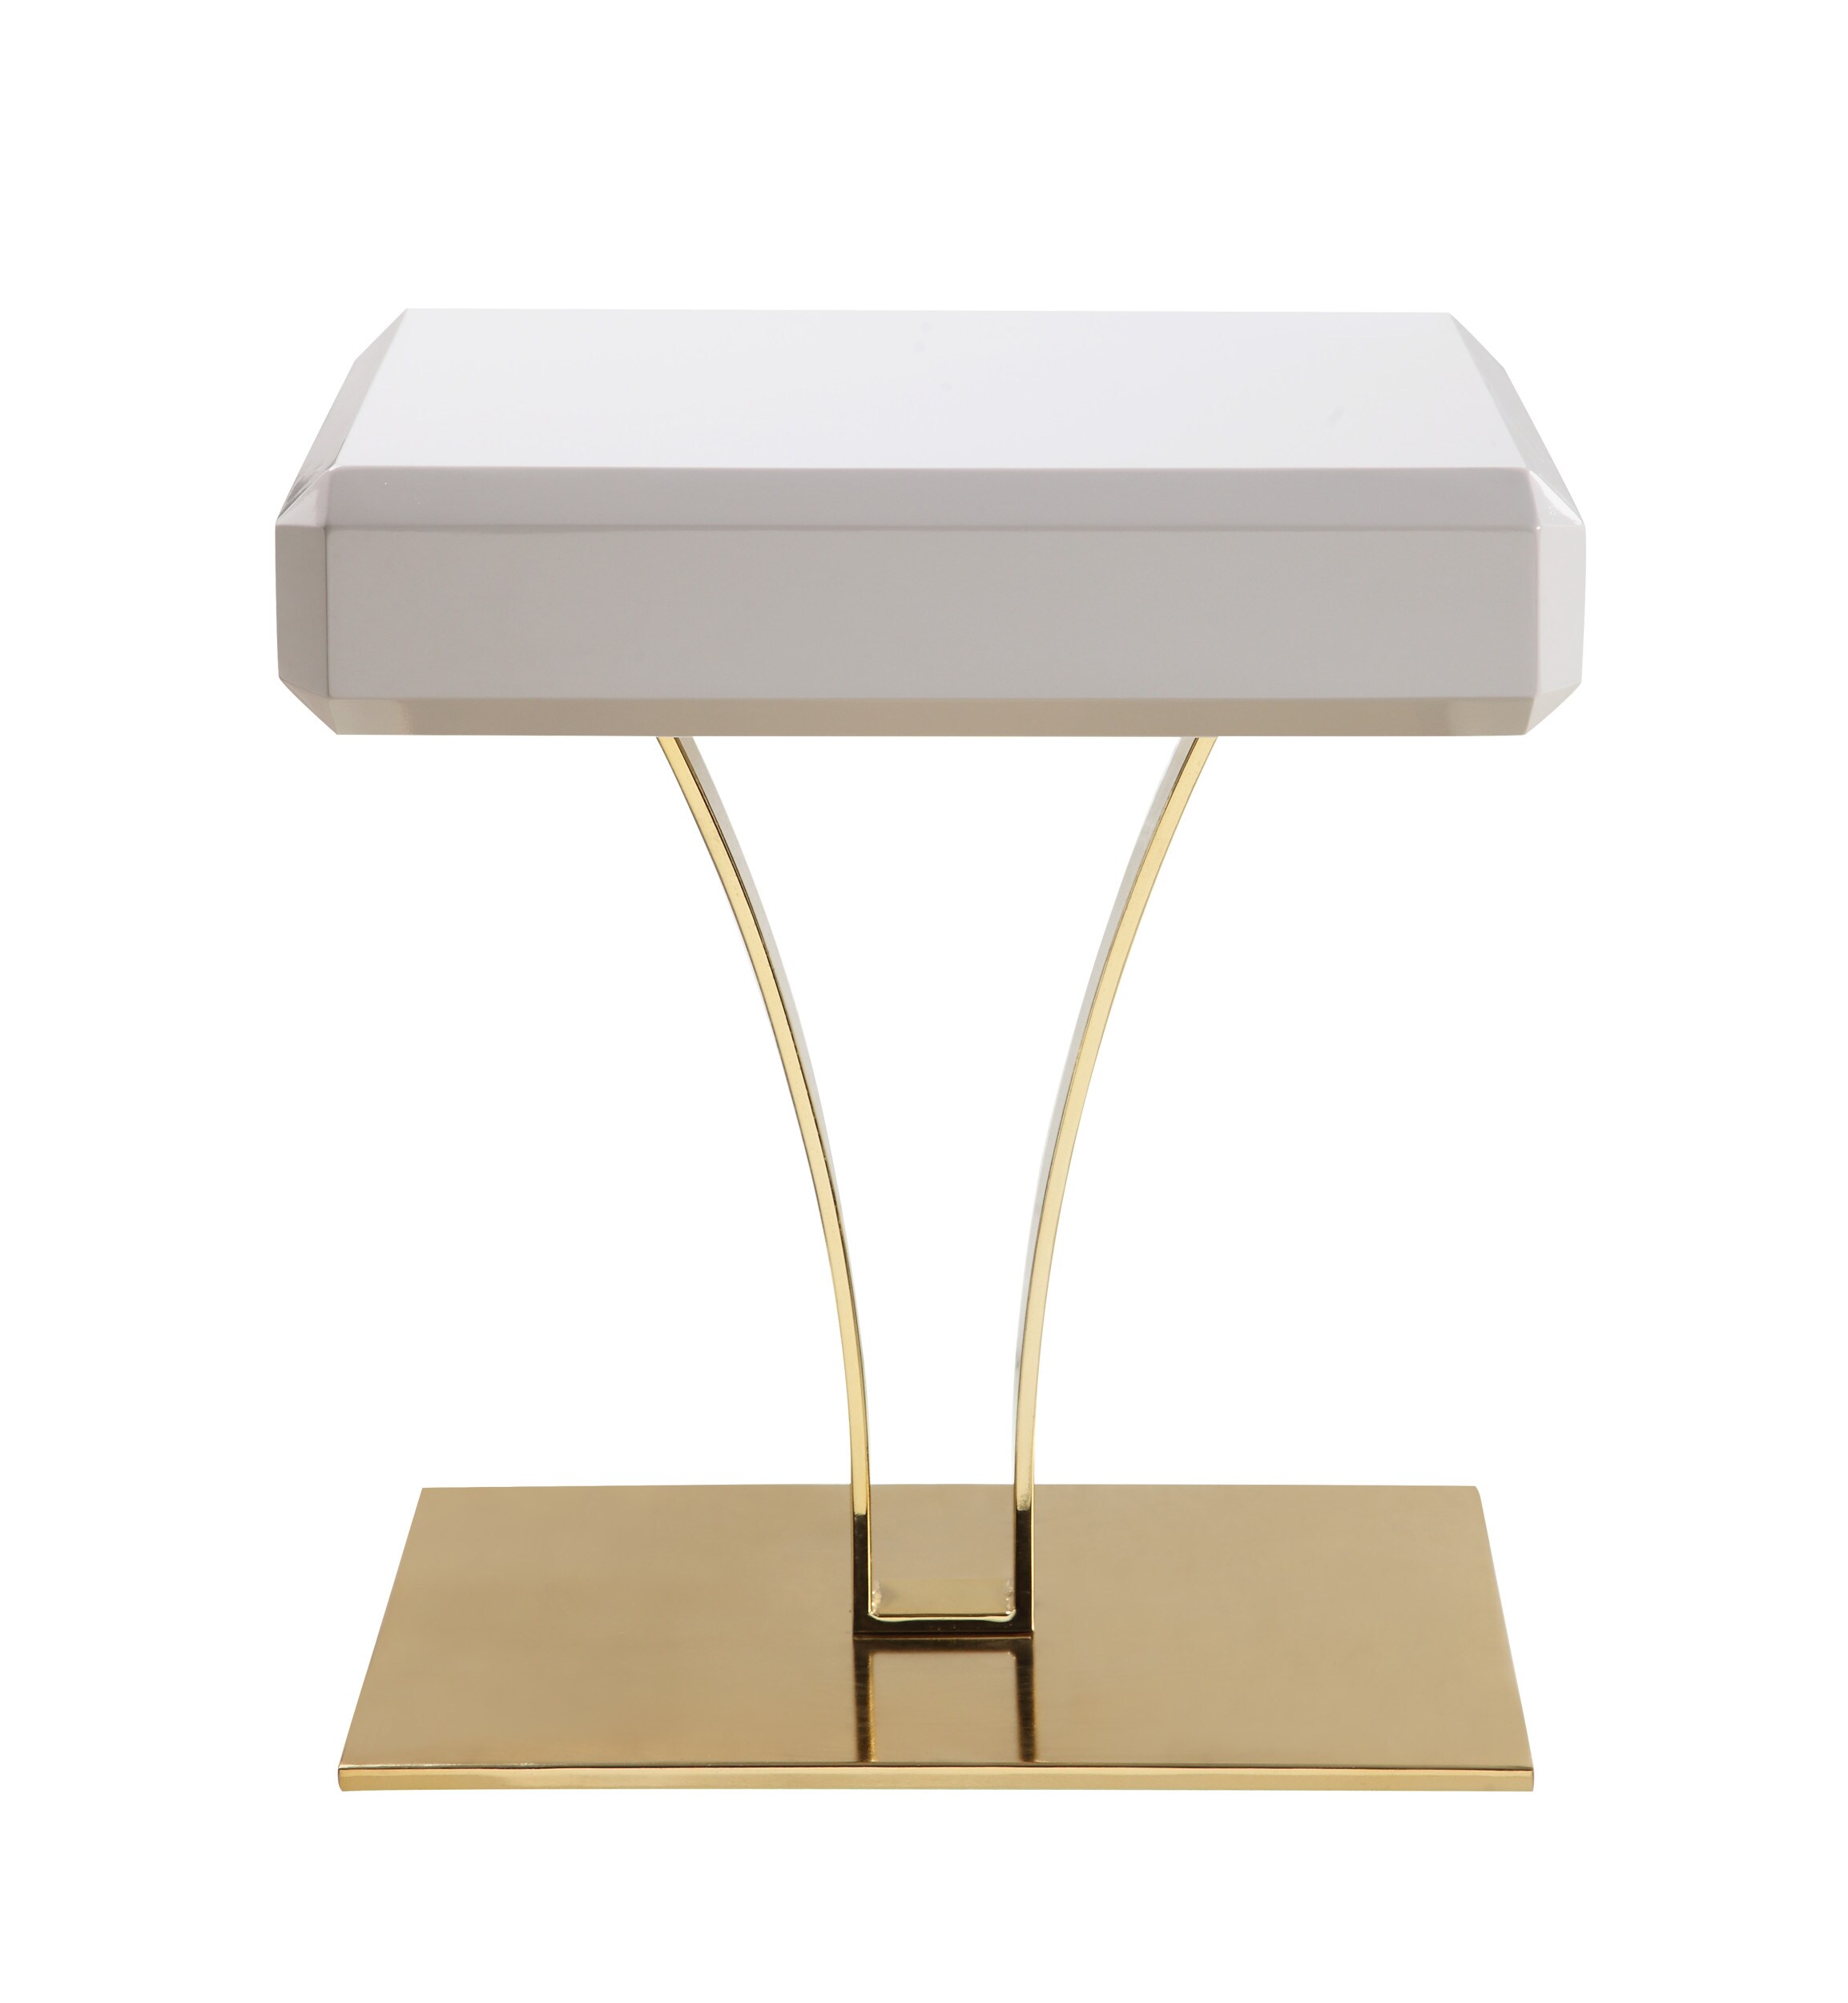 Beige Iconic Home Rochelle Nightstand Side Table with Self Closing Drawer Gold Plate Metal Stem Base Modern Contemporary 